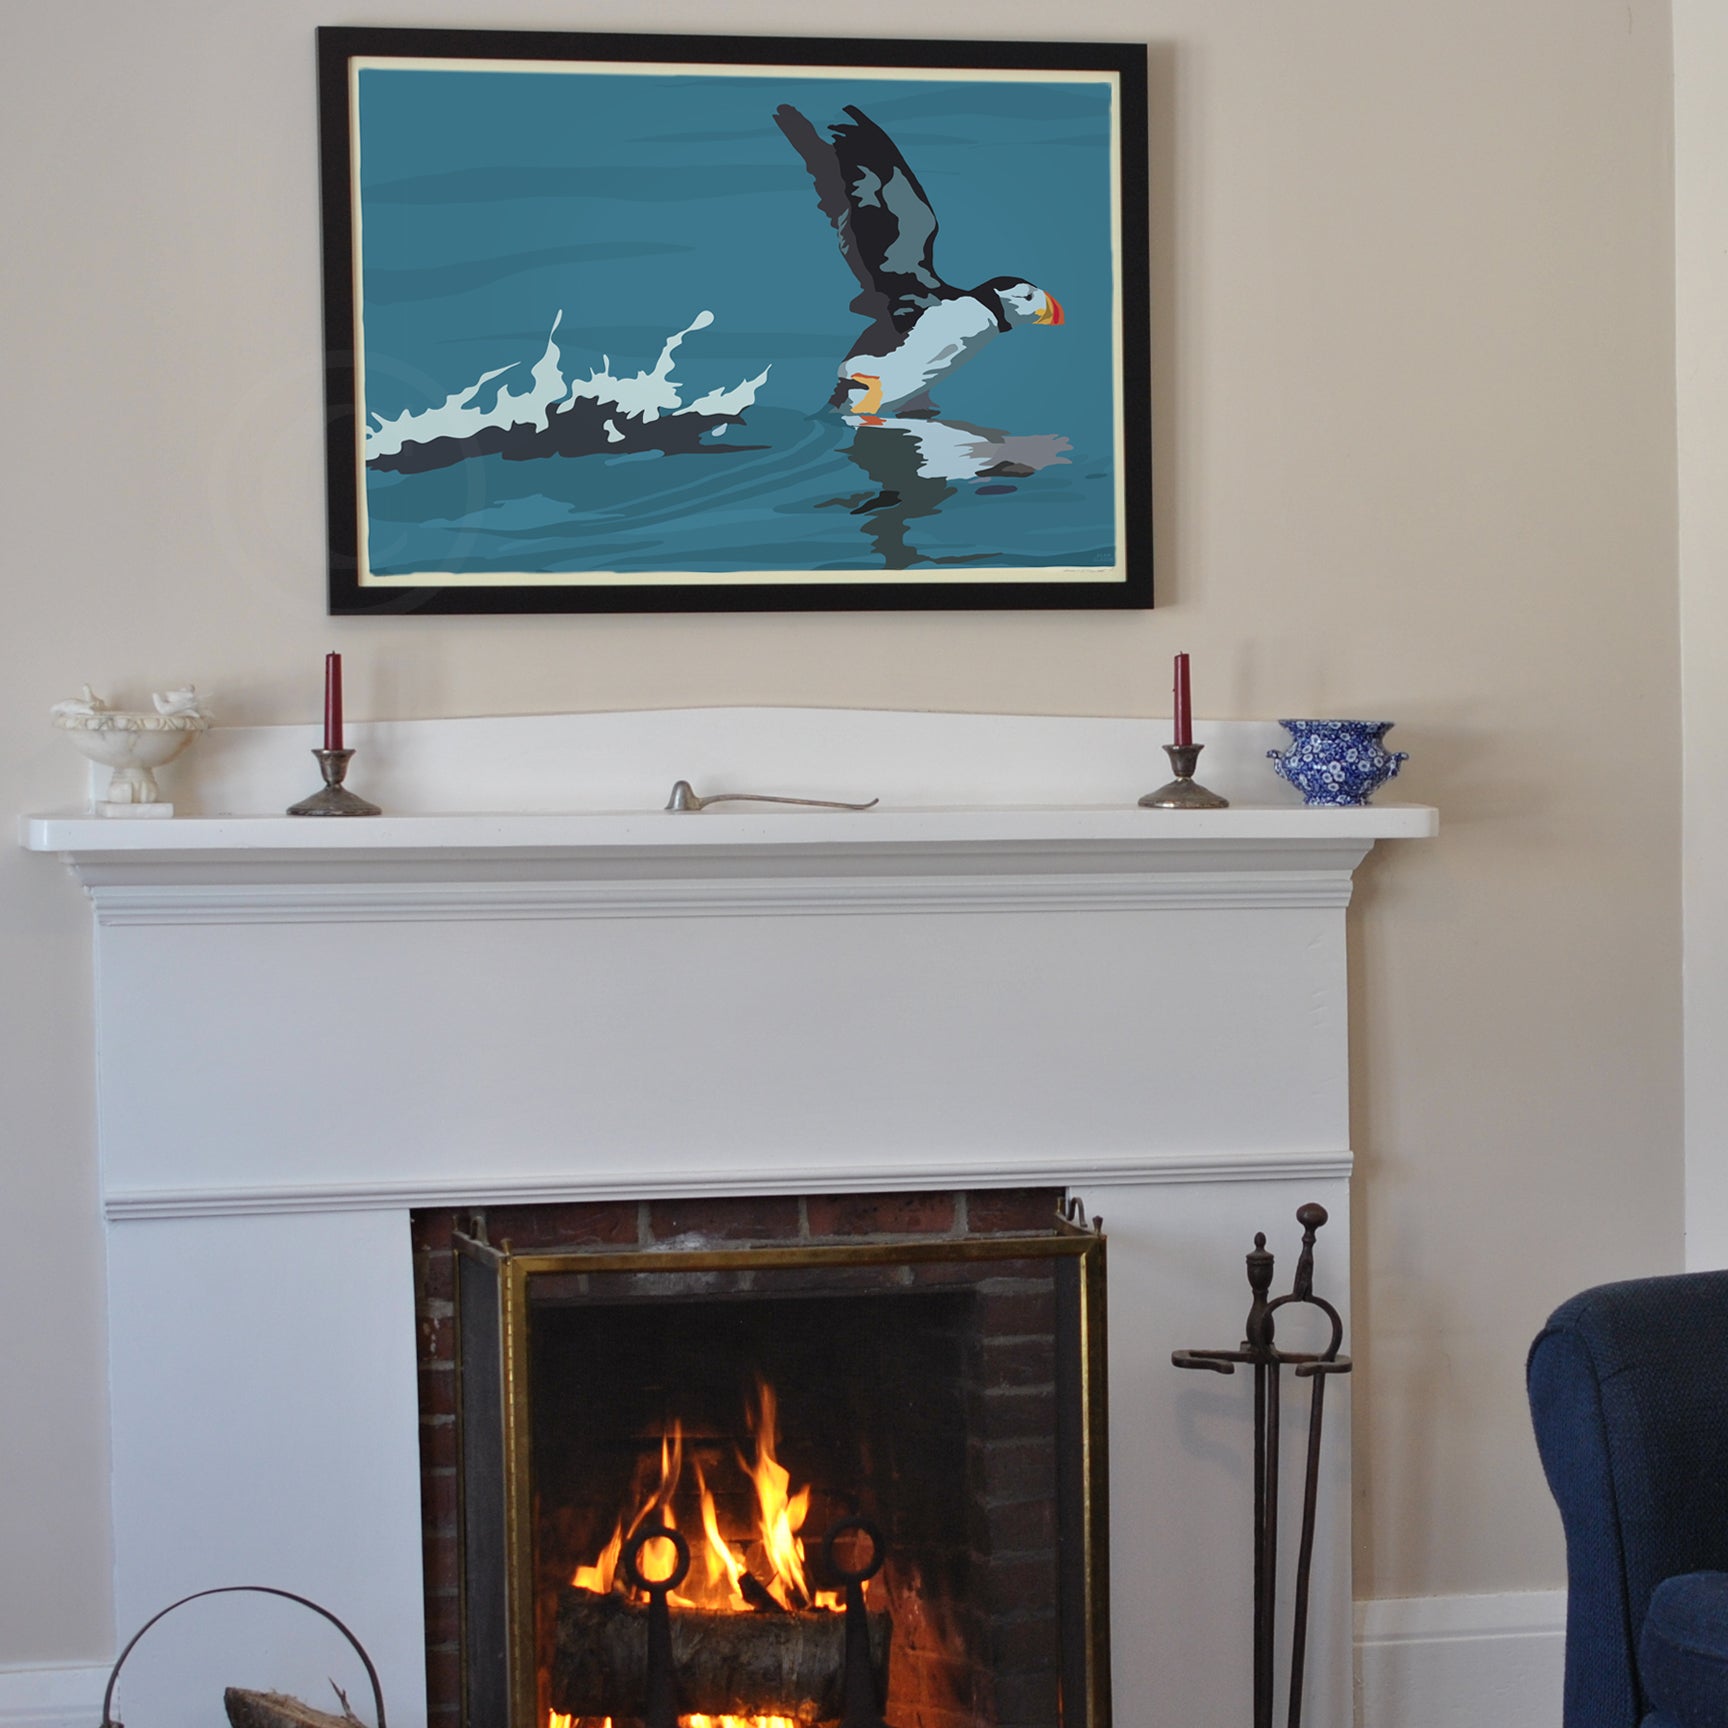 Puffin Takes Flight Art Print 24" x 36" Framed Wall Poster By Alan Claude - Maine